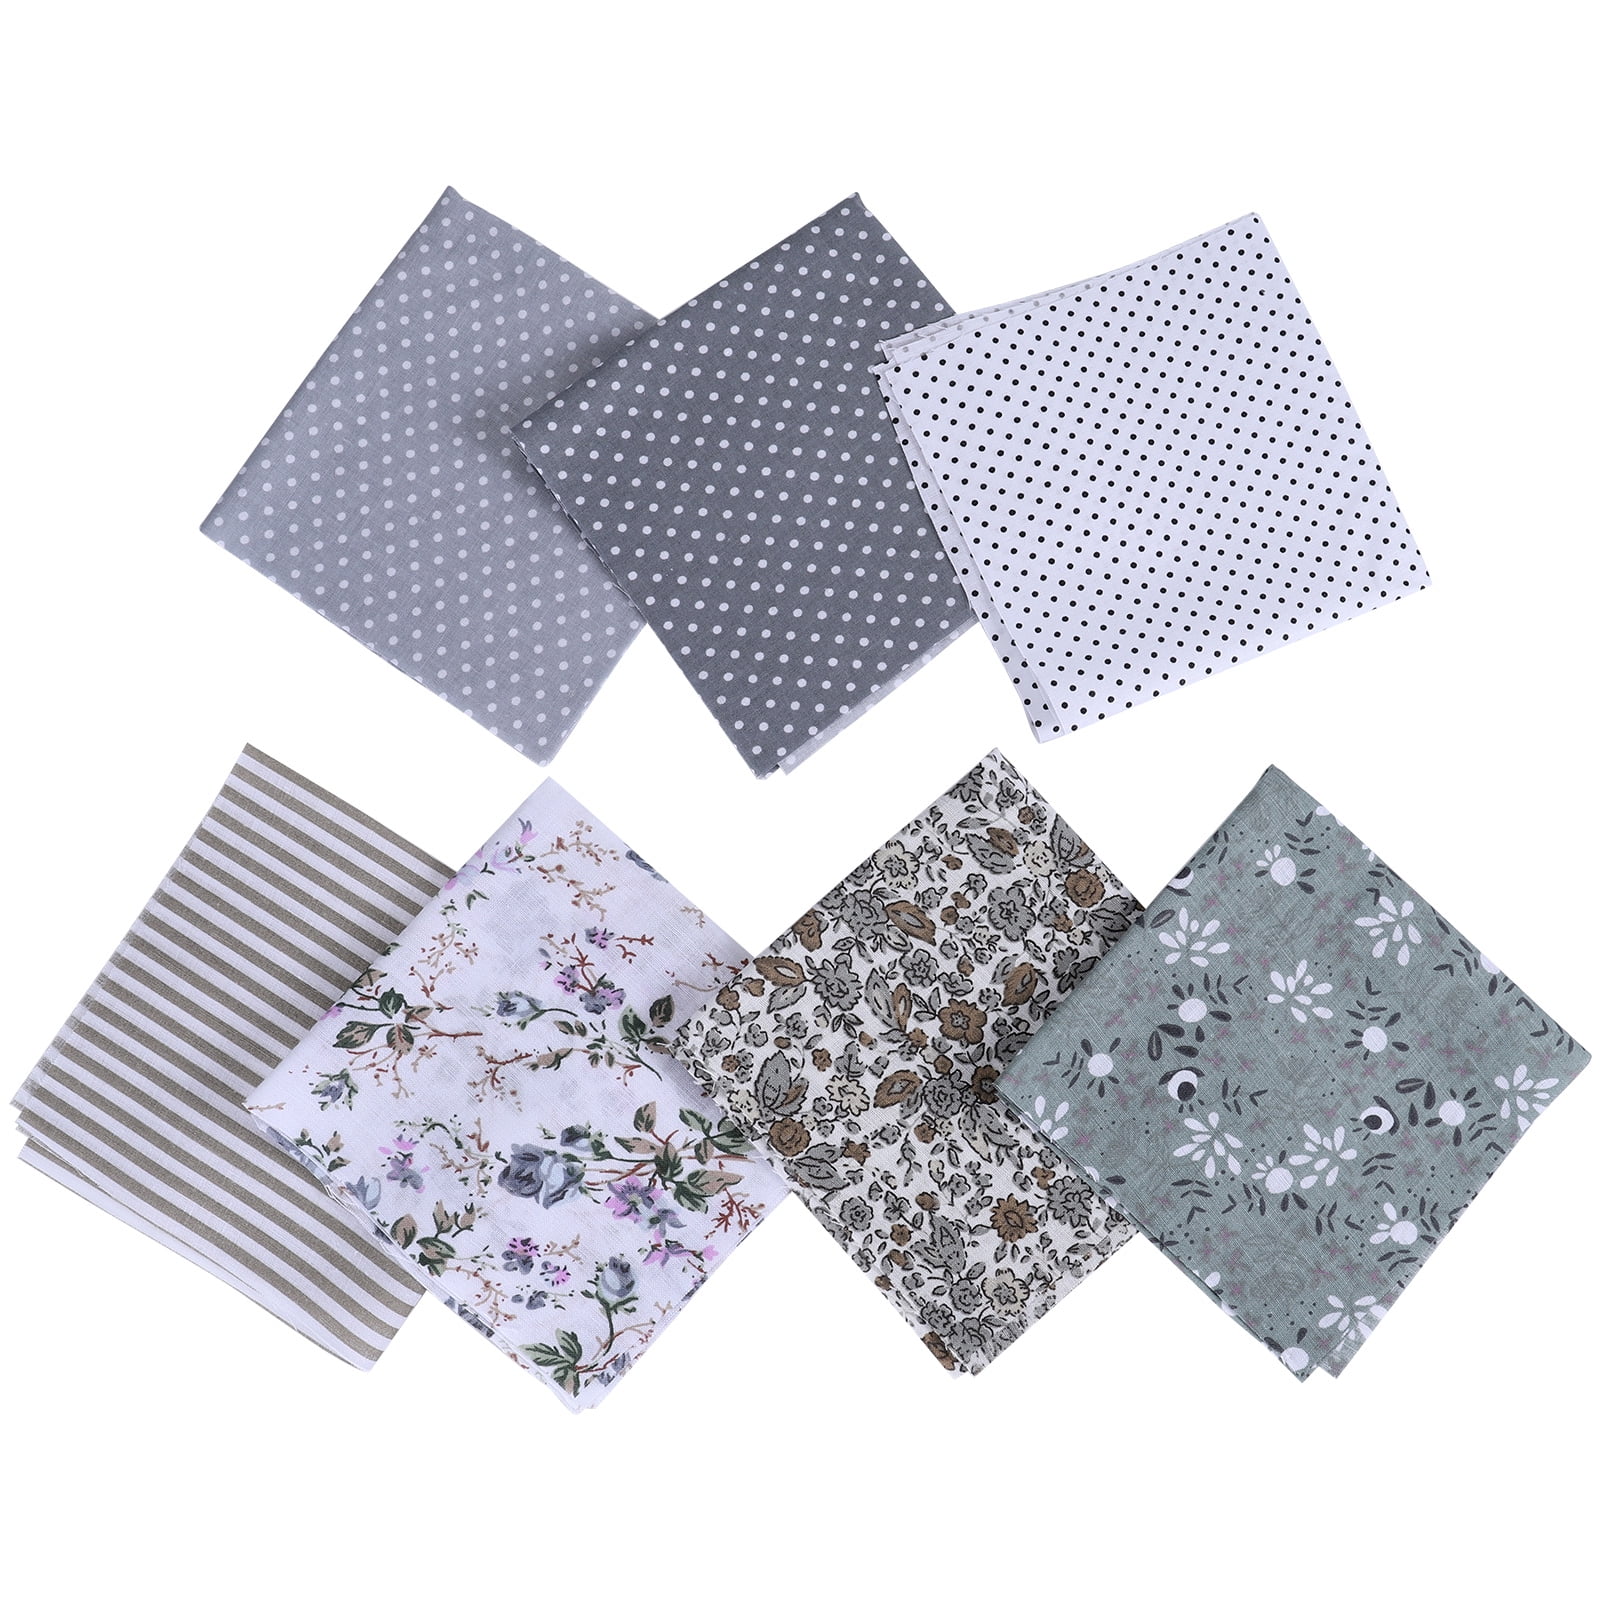 YOLUFER DIY Cotton Fabric Bundle 19.7 x 19.7 Inches, 7PCS Different  Pattern, Squares Patchwork Material for Sewing Quilting Scrapbooking.